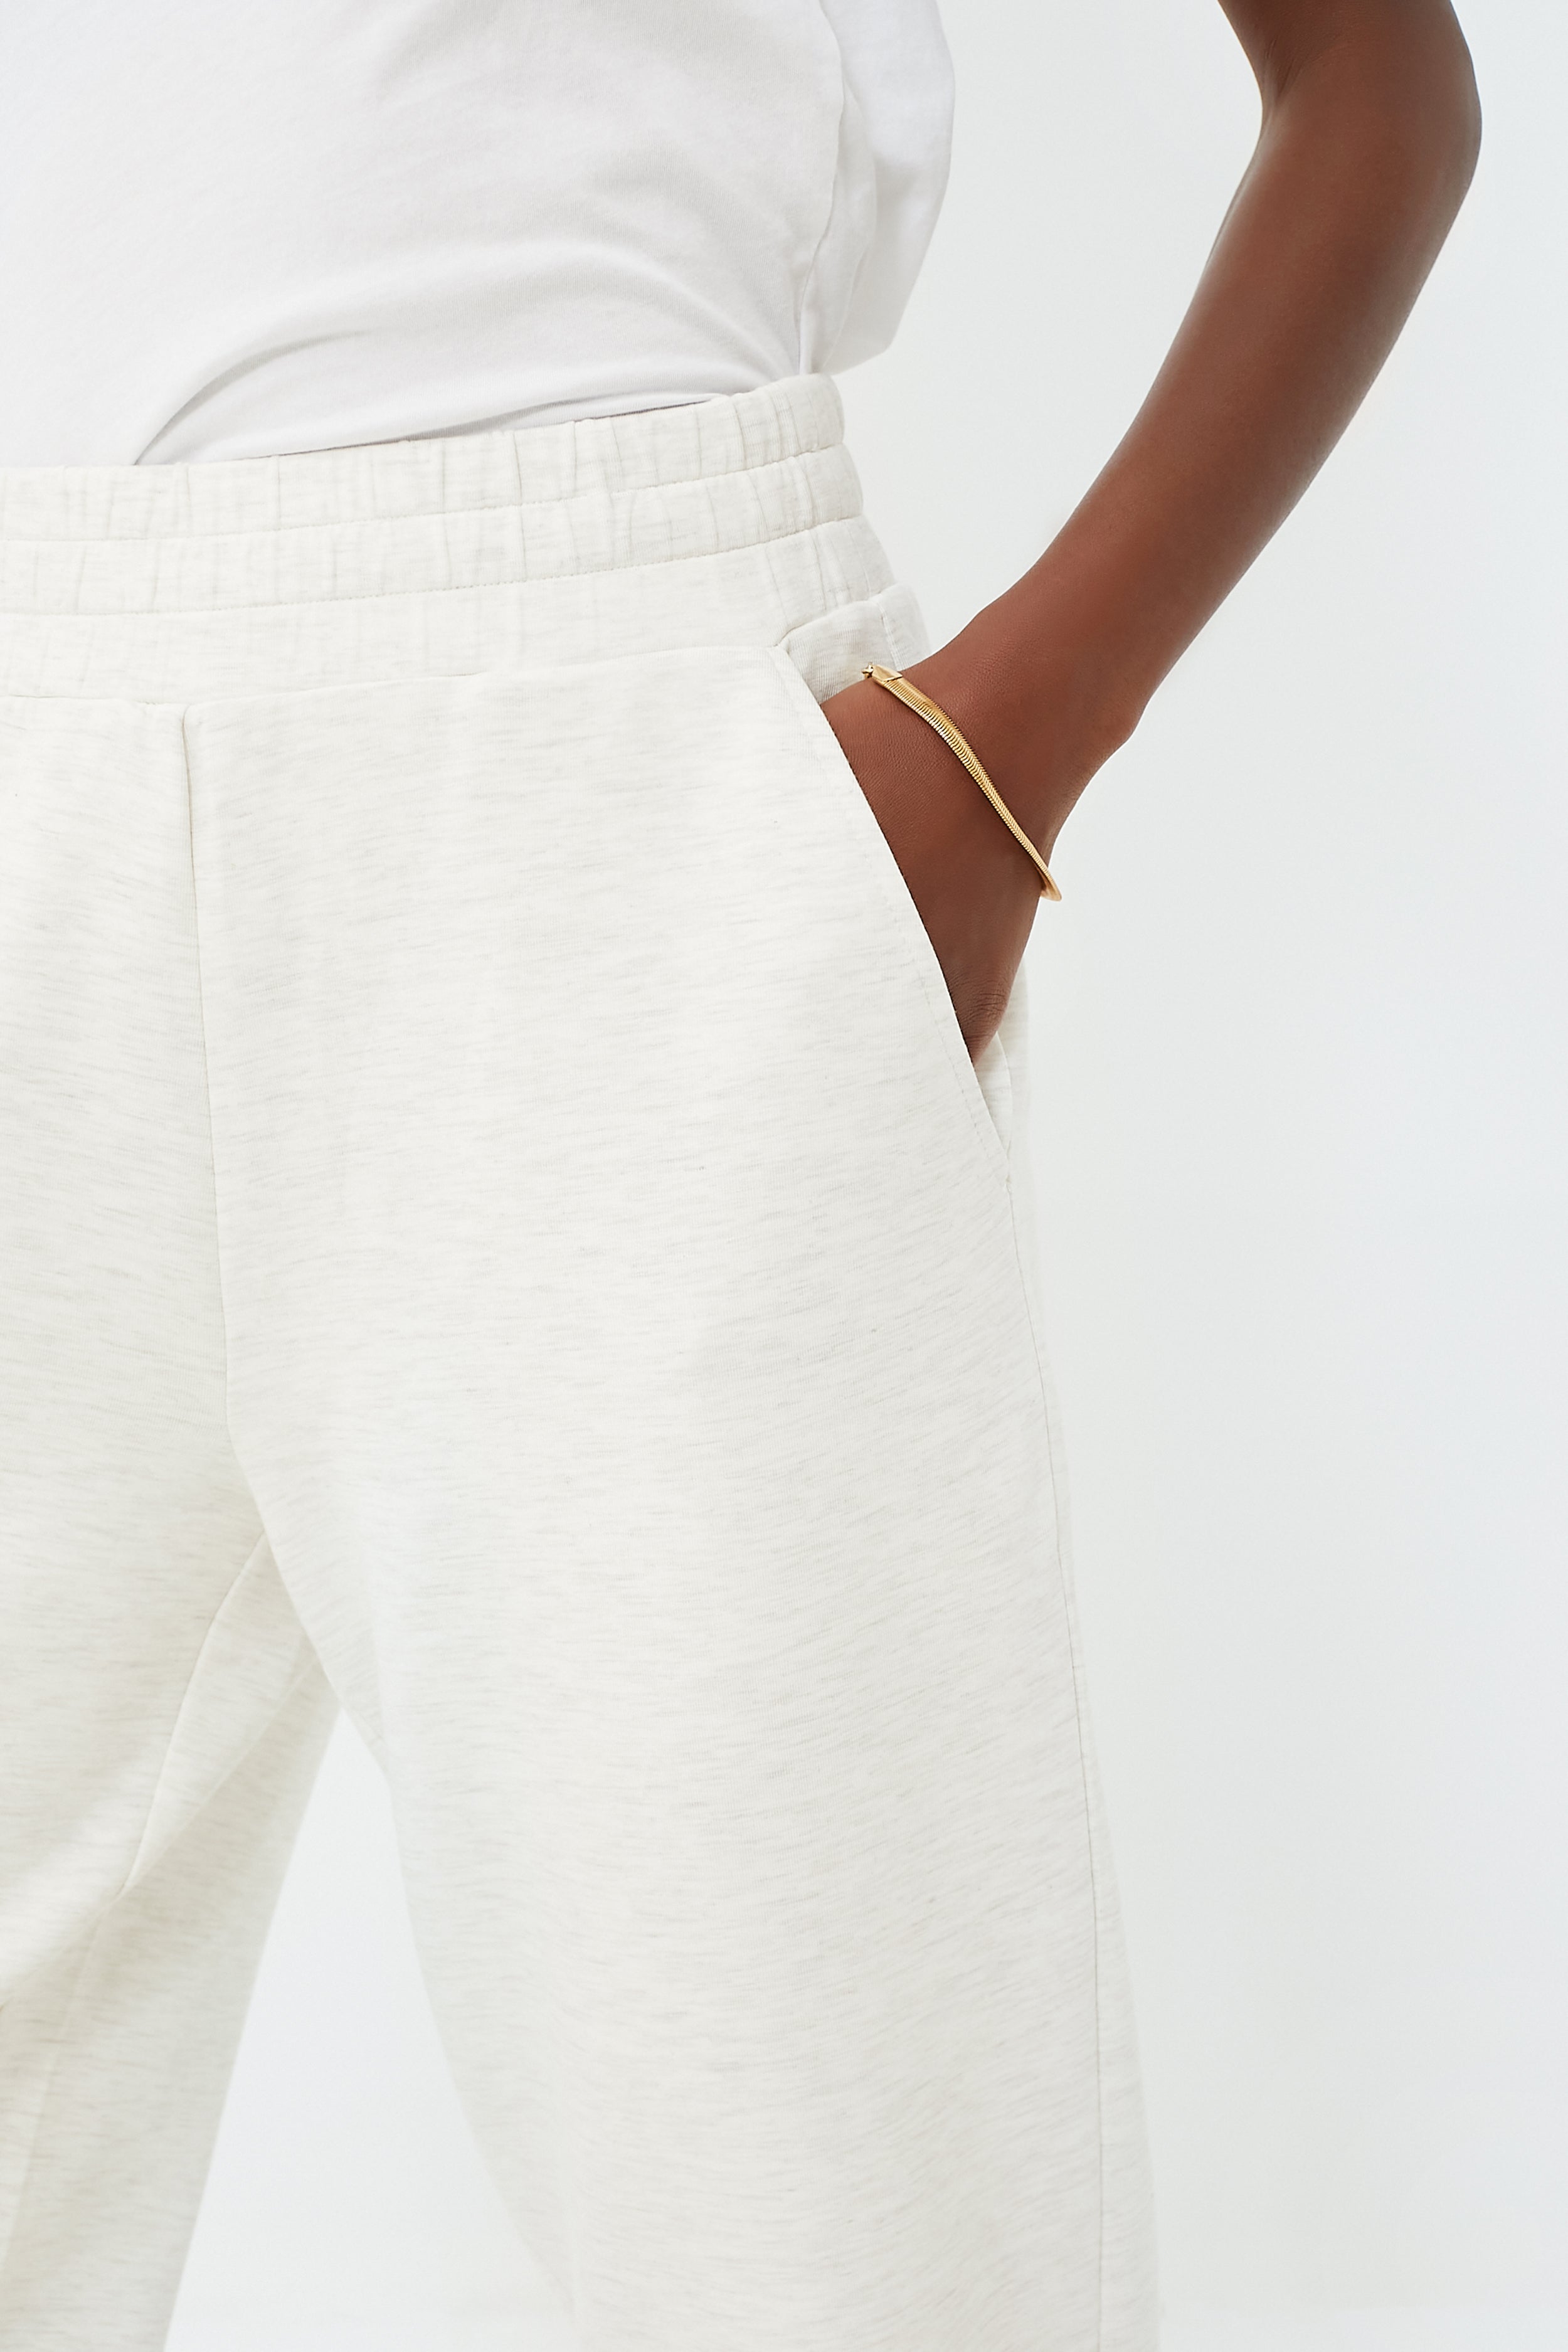 The Relaxed Pant 27.5 in Ivory Marl exclusive at The Shoe Hive